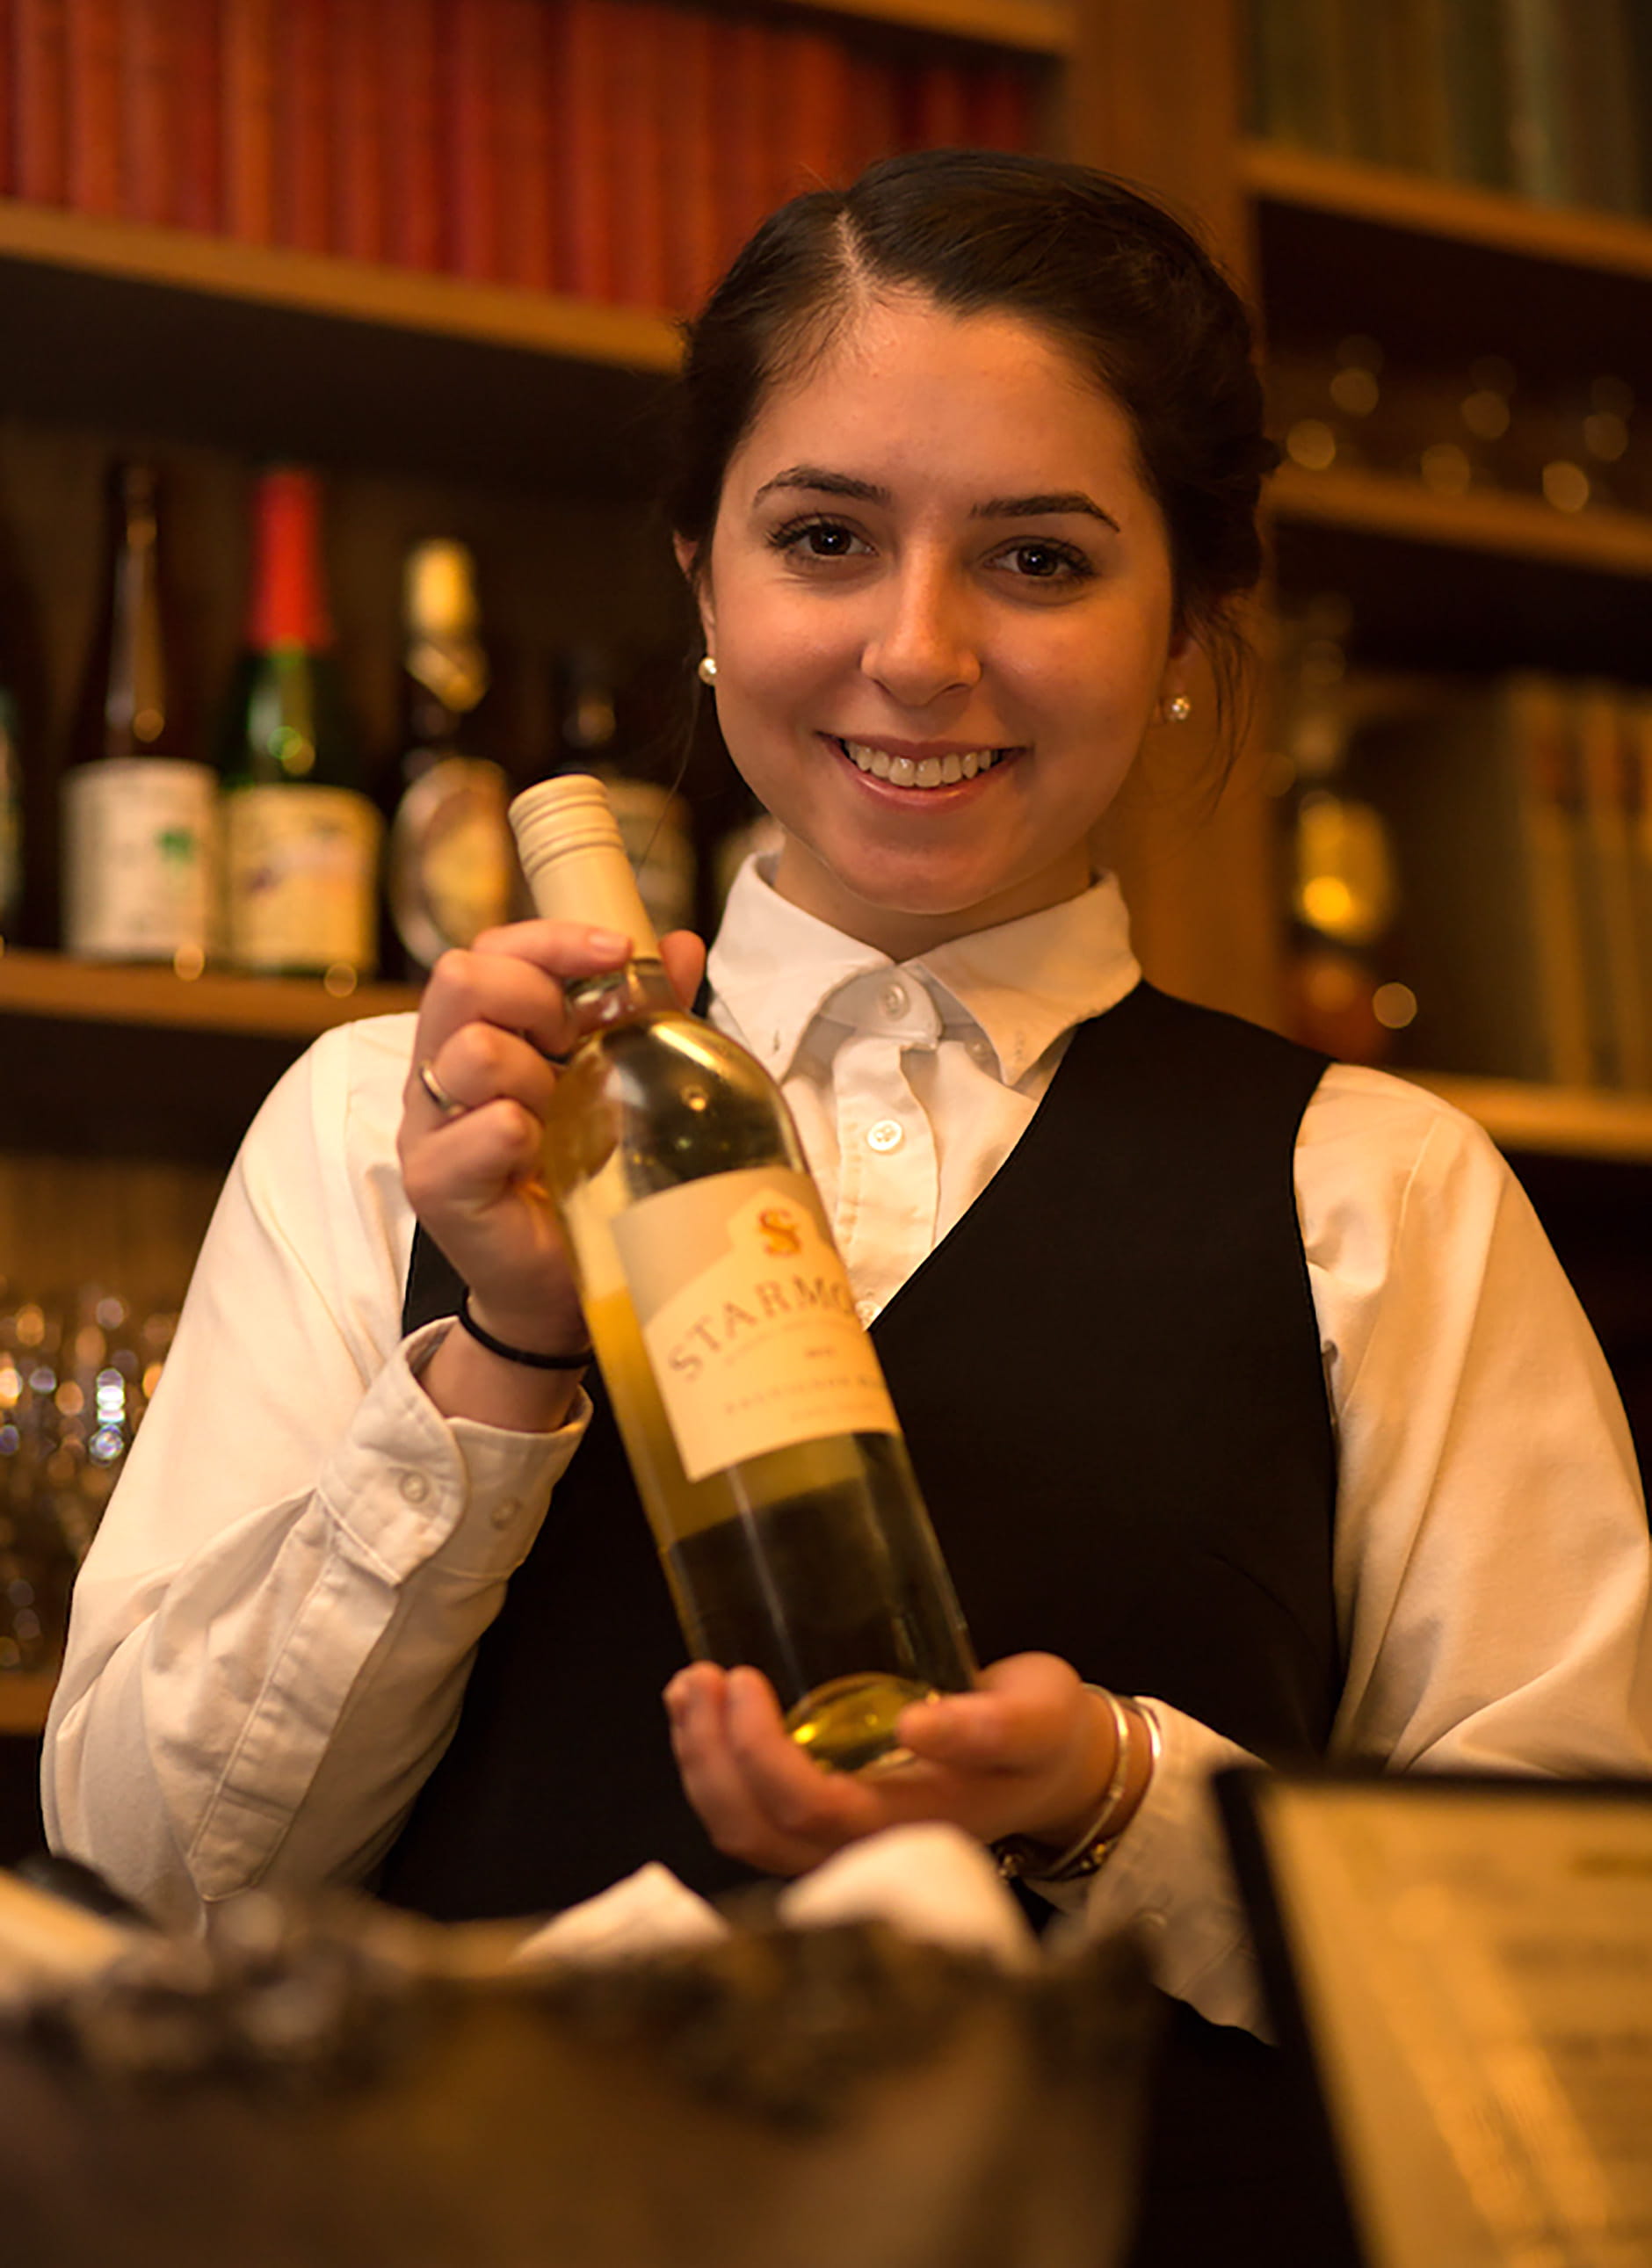 An Endicott College Hospitality Management student prepares a bottle of wine for a tasting event.